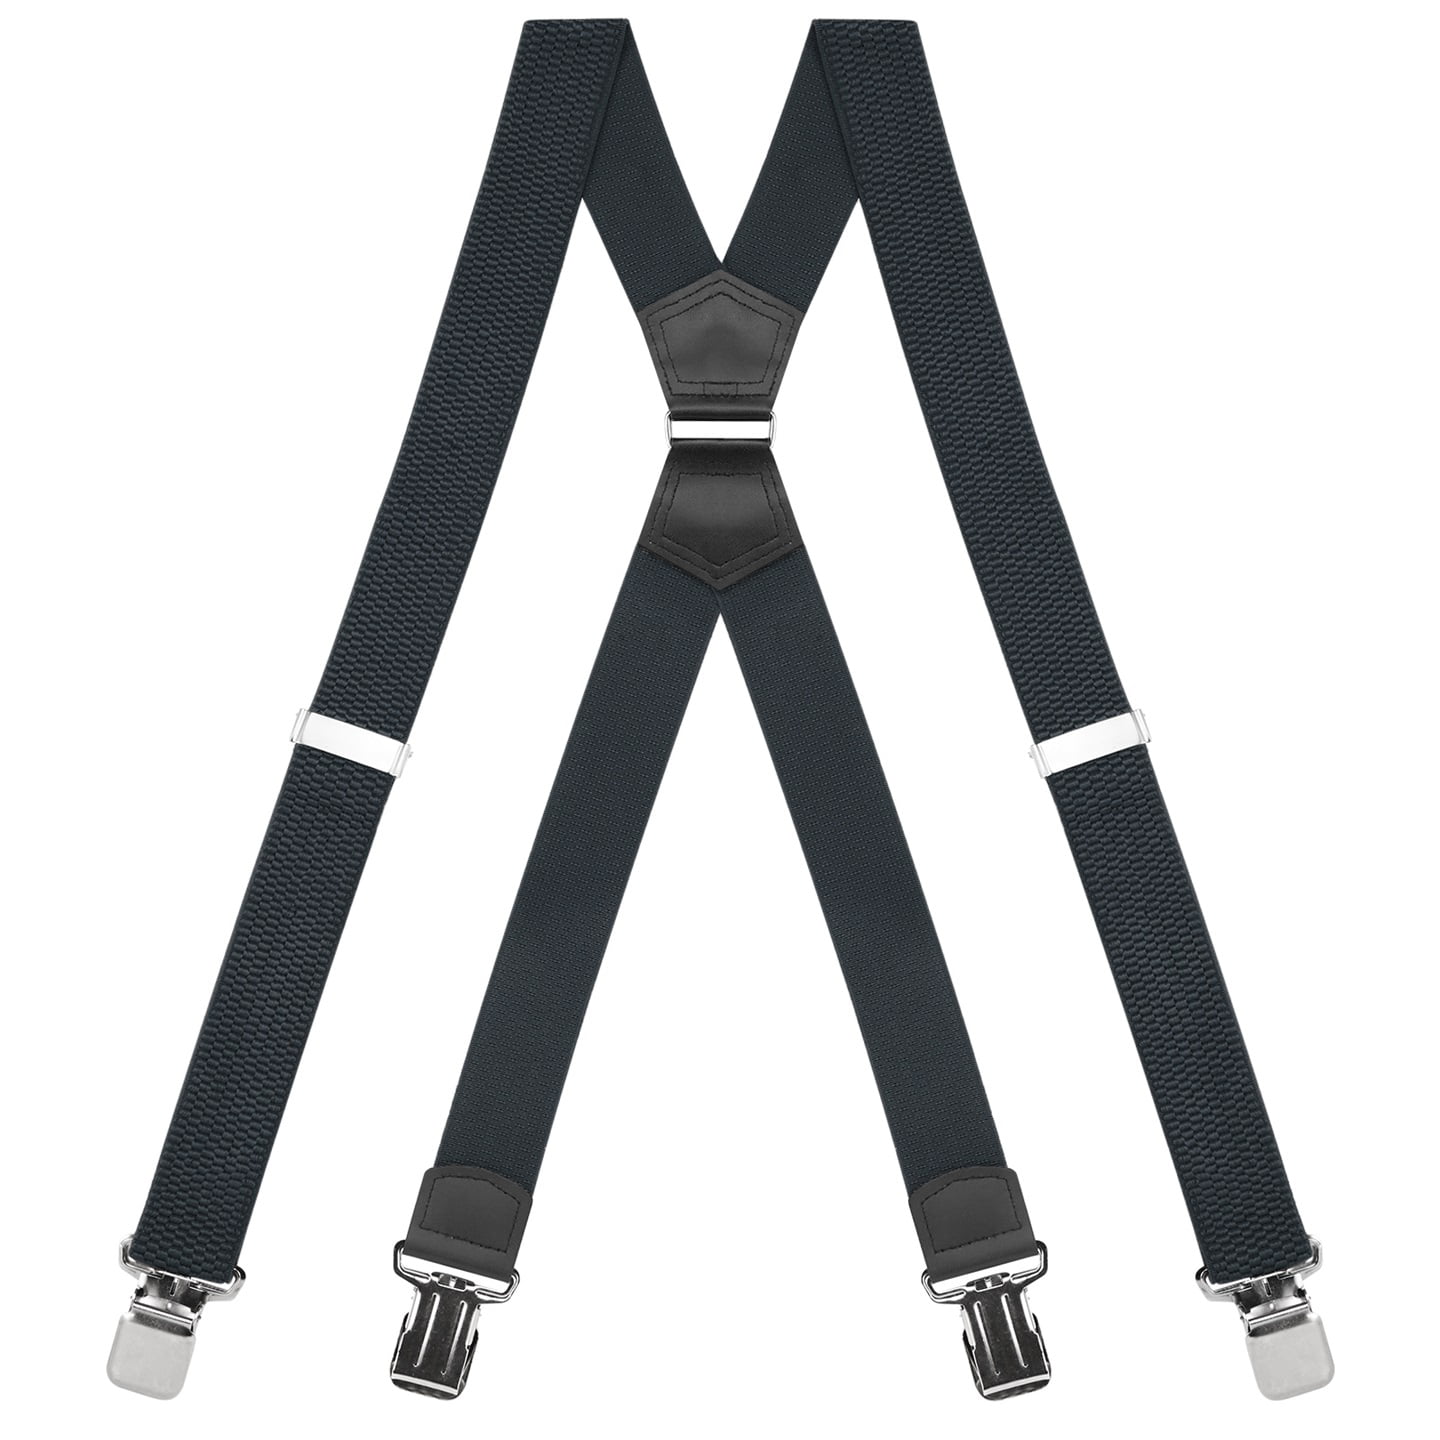 Buyless Fashion Heavy Duty Suspenders for Men - 48 Adjustable Straps 1 ...